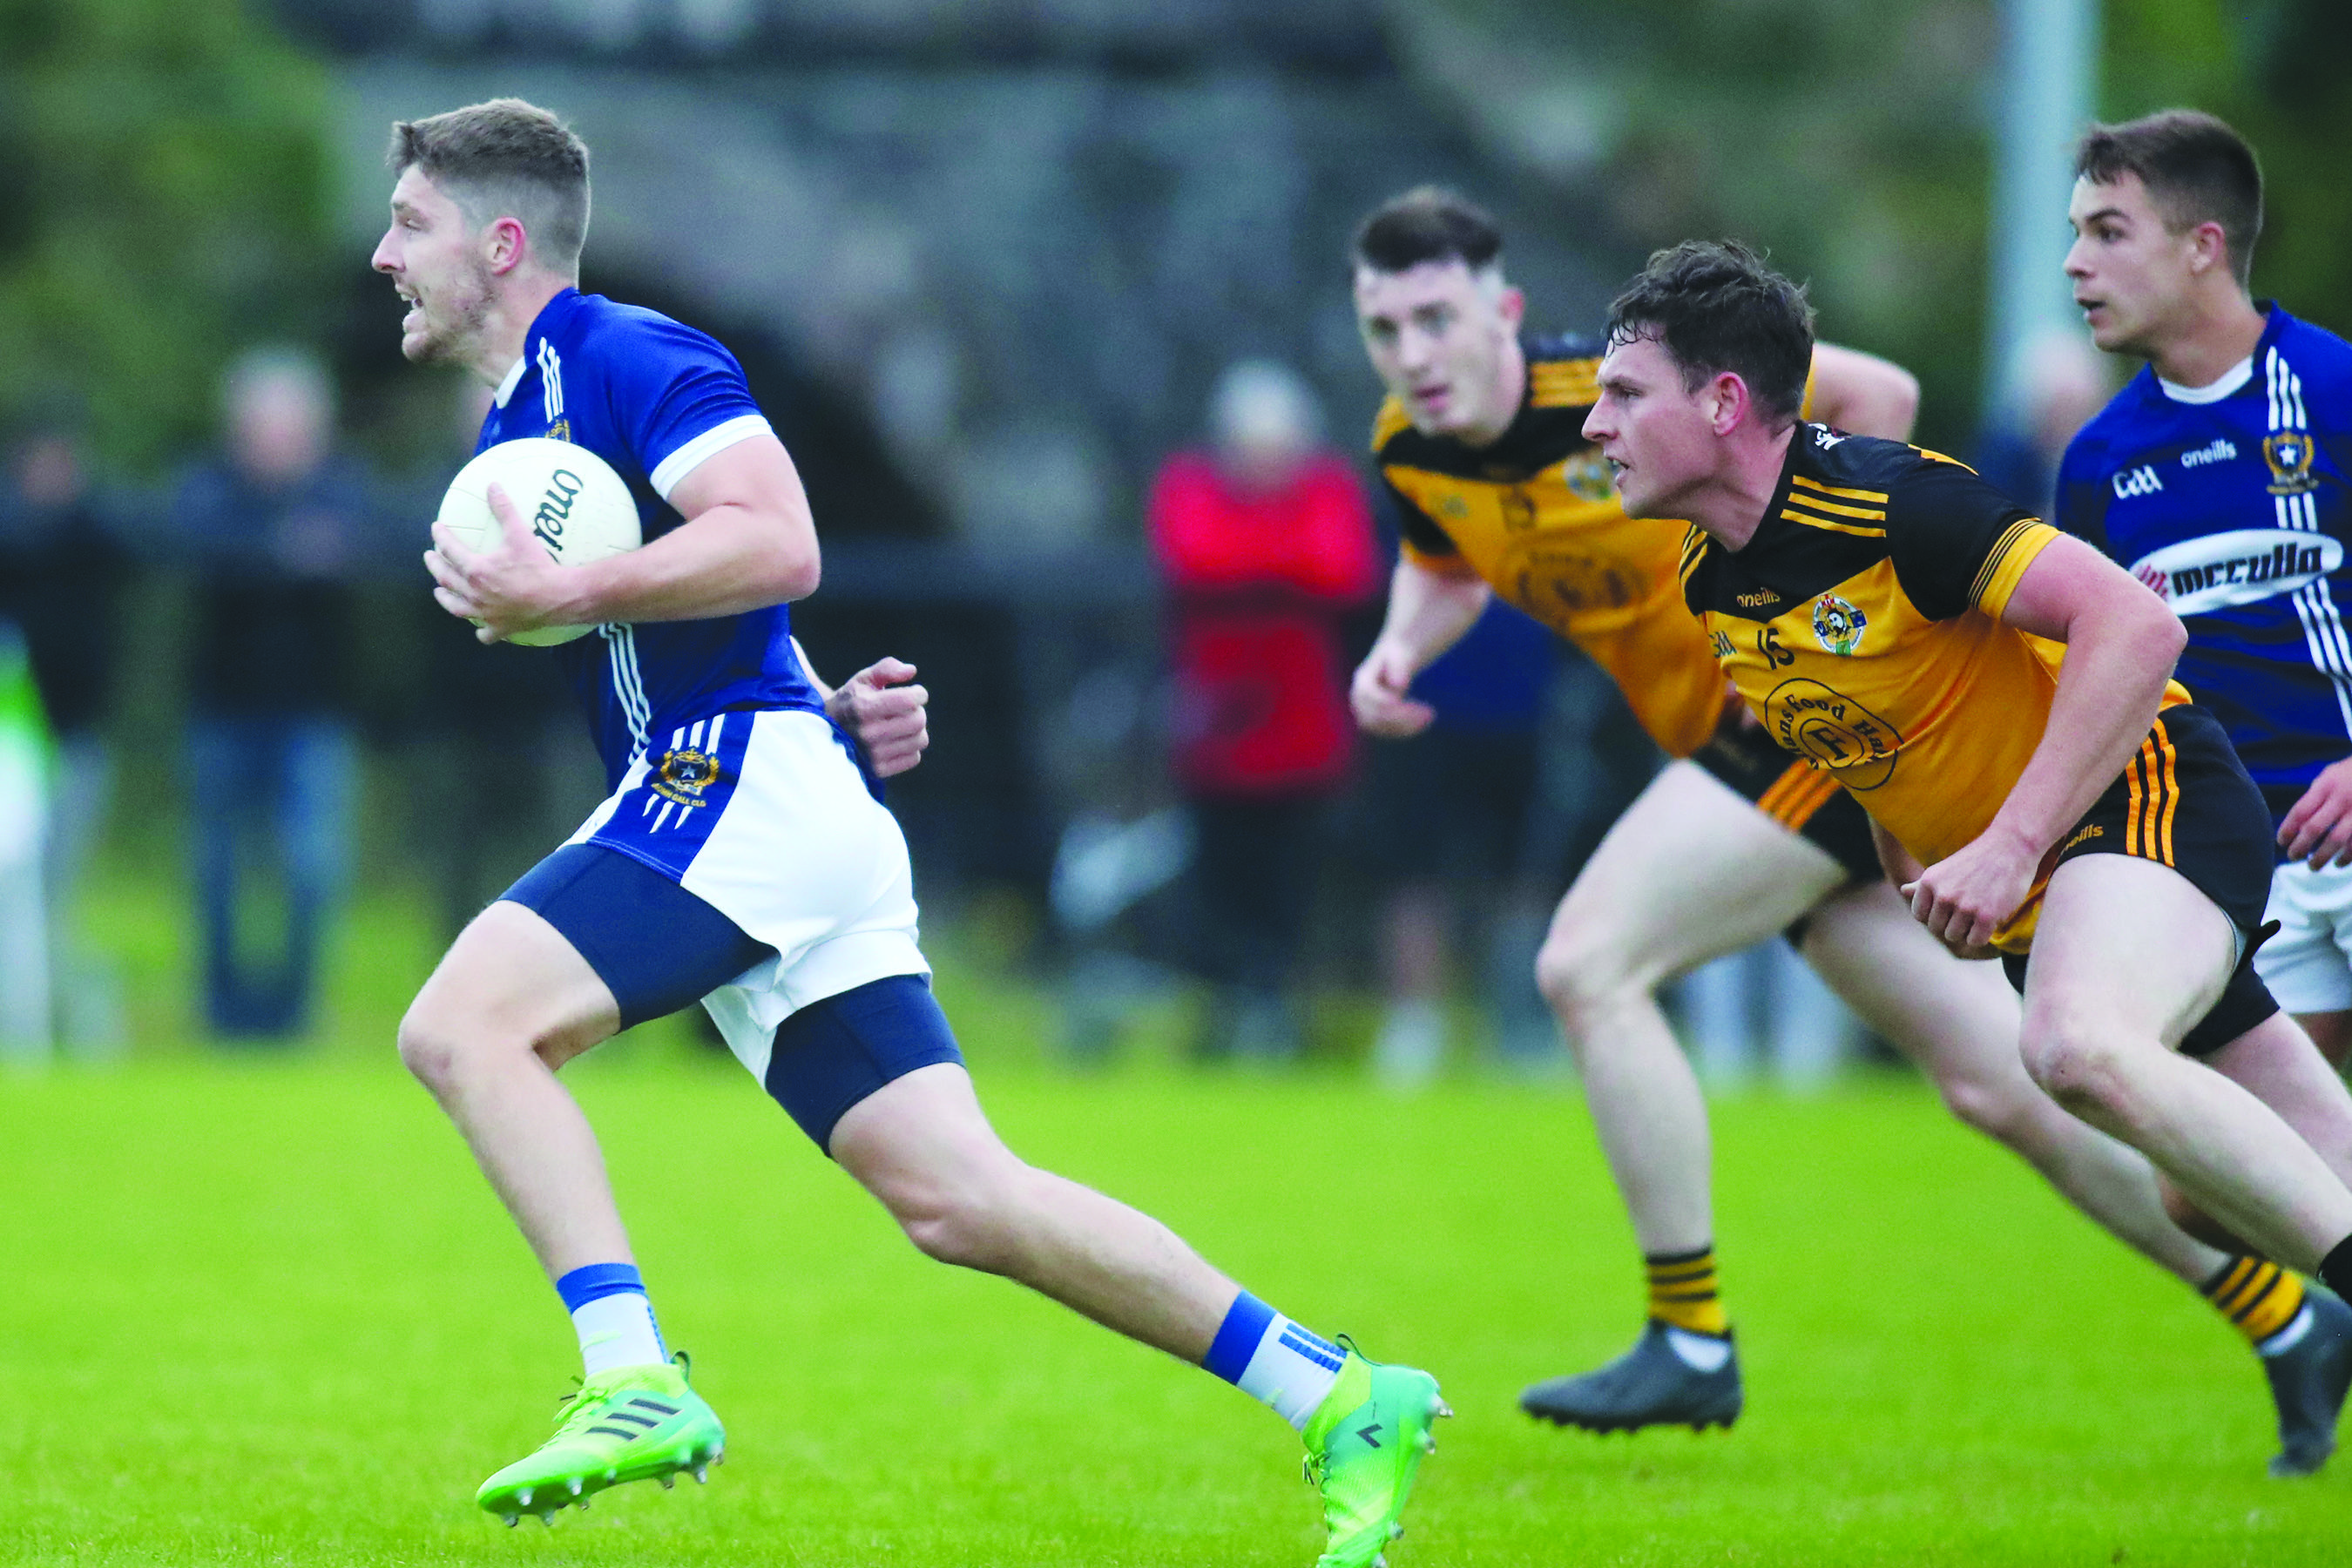 Jackson McGreevy goes on the attack during Tuesday’s gripping quarter-final